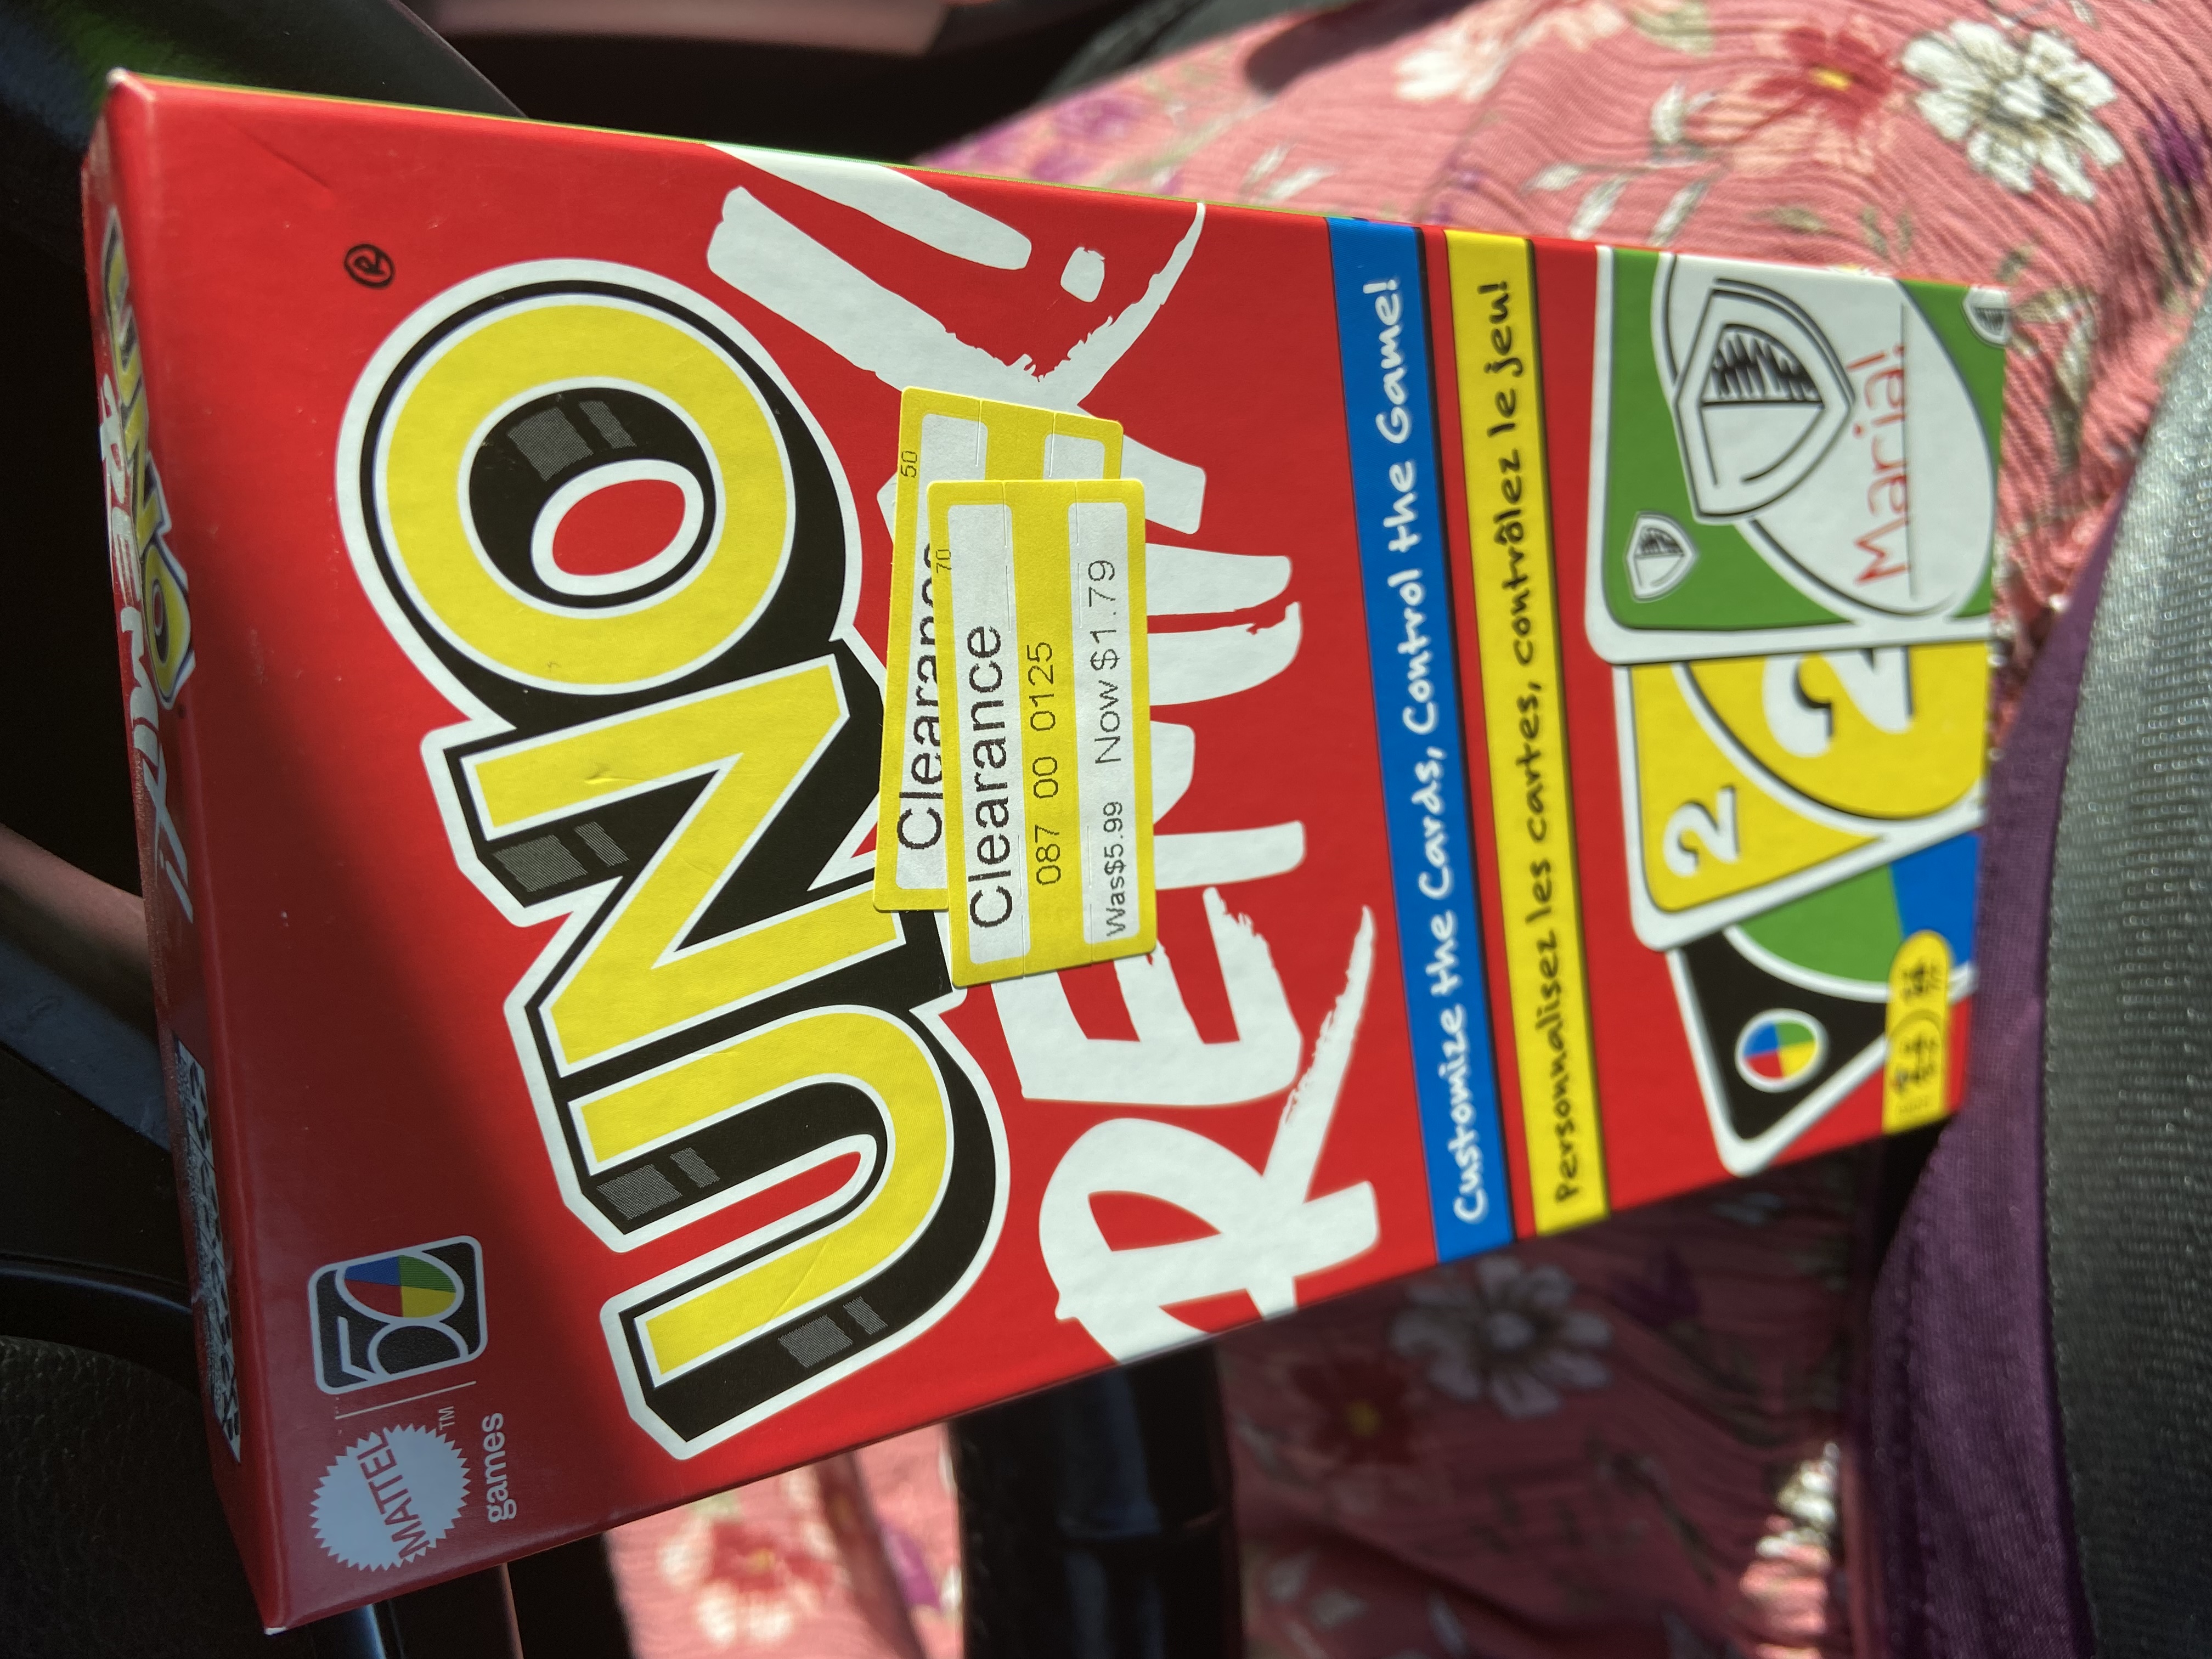 Uno Remix in-store at Target $1.79 YMMV